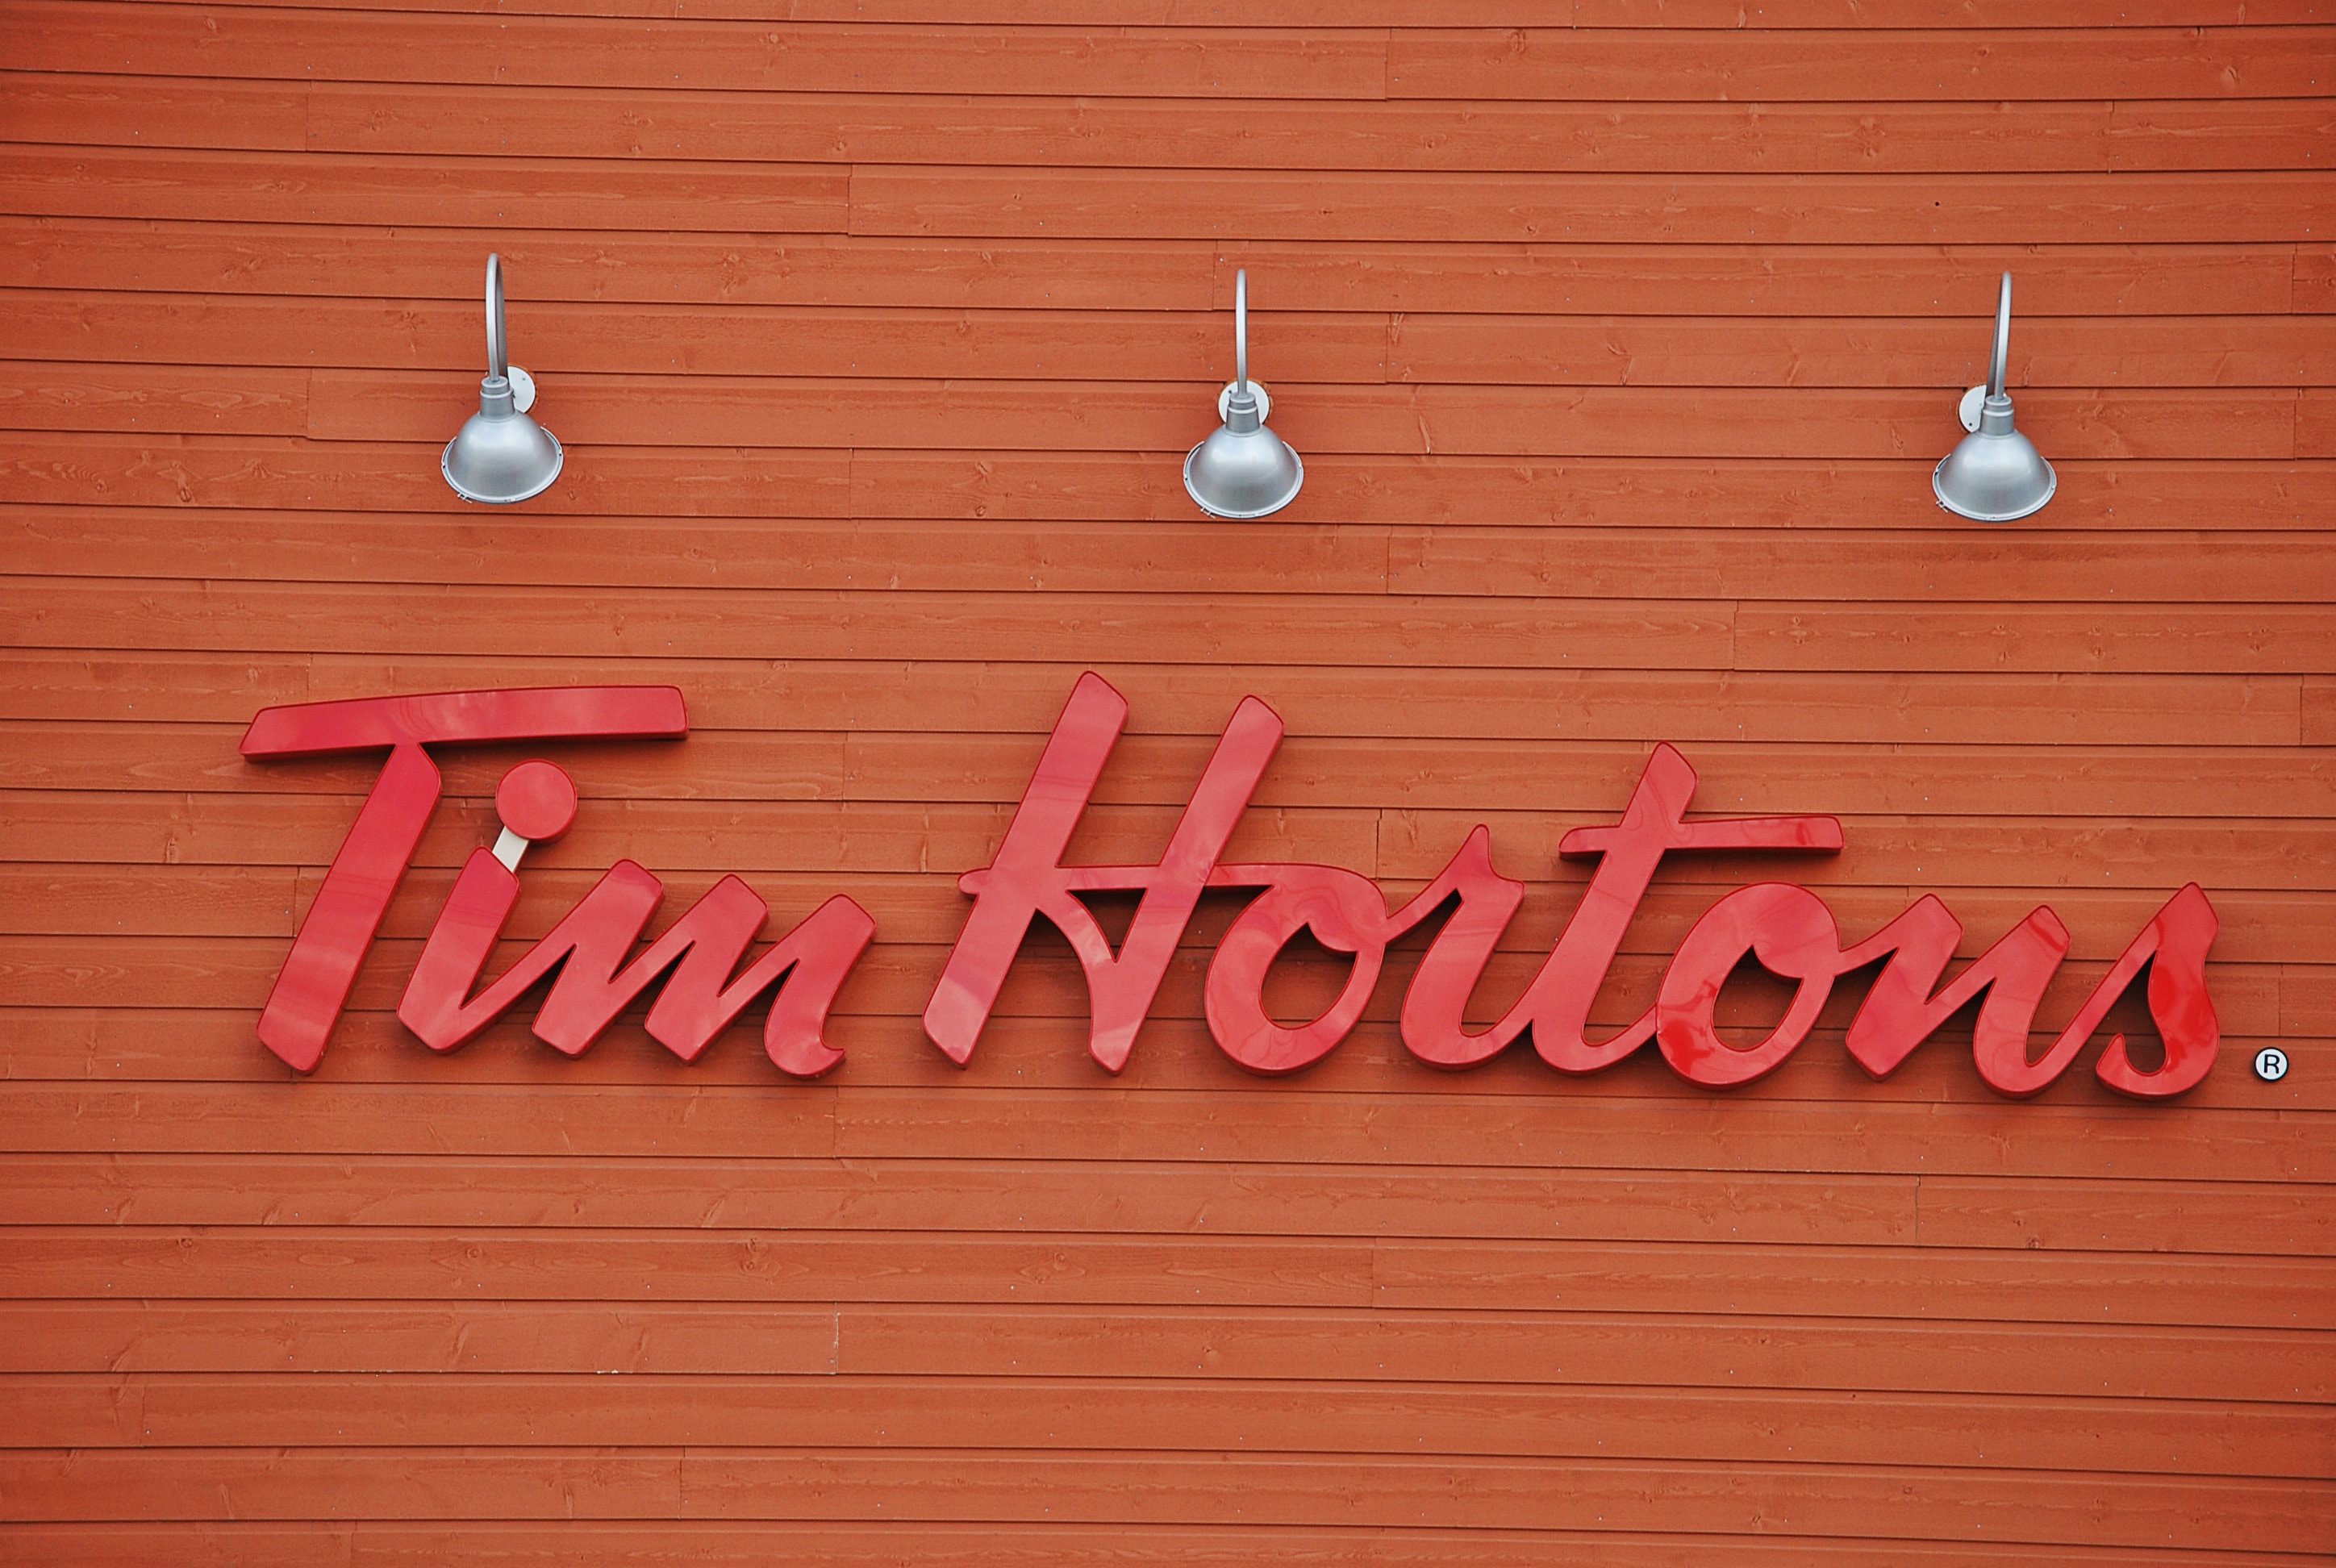 Supply Chain Scene, close up image of a Tim Hortons sign 